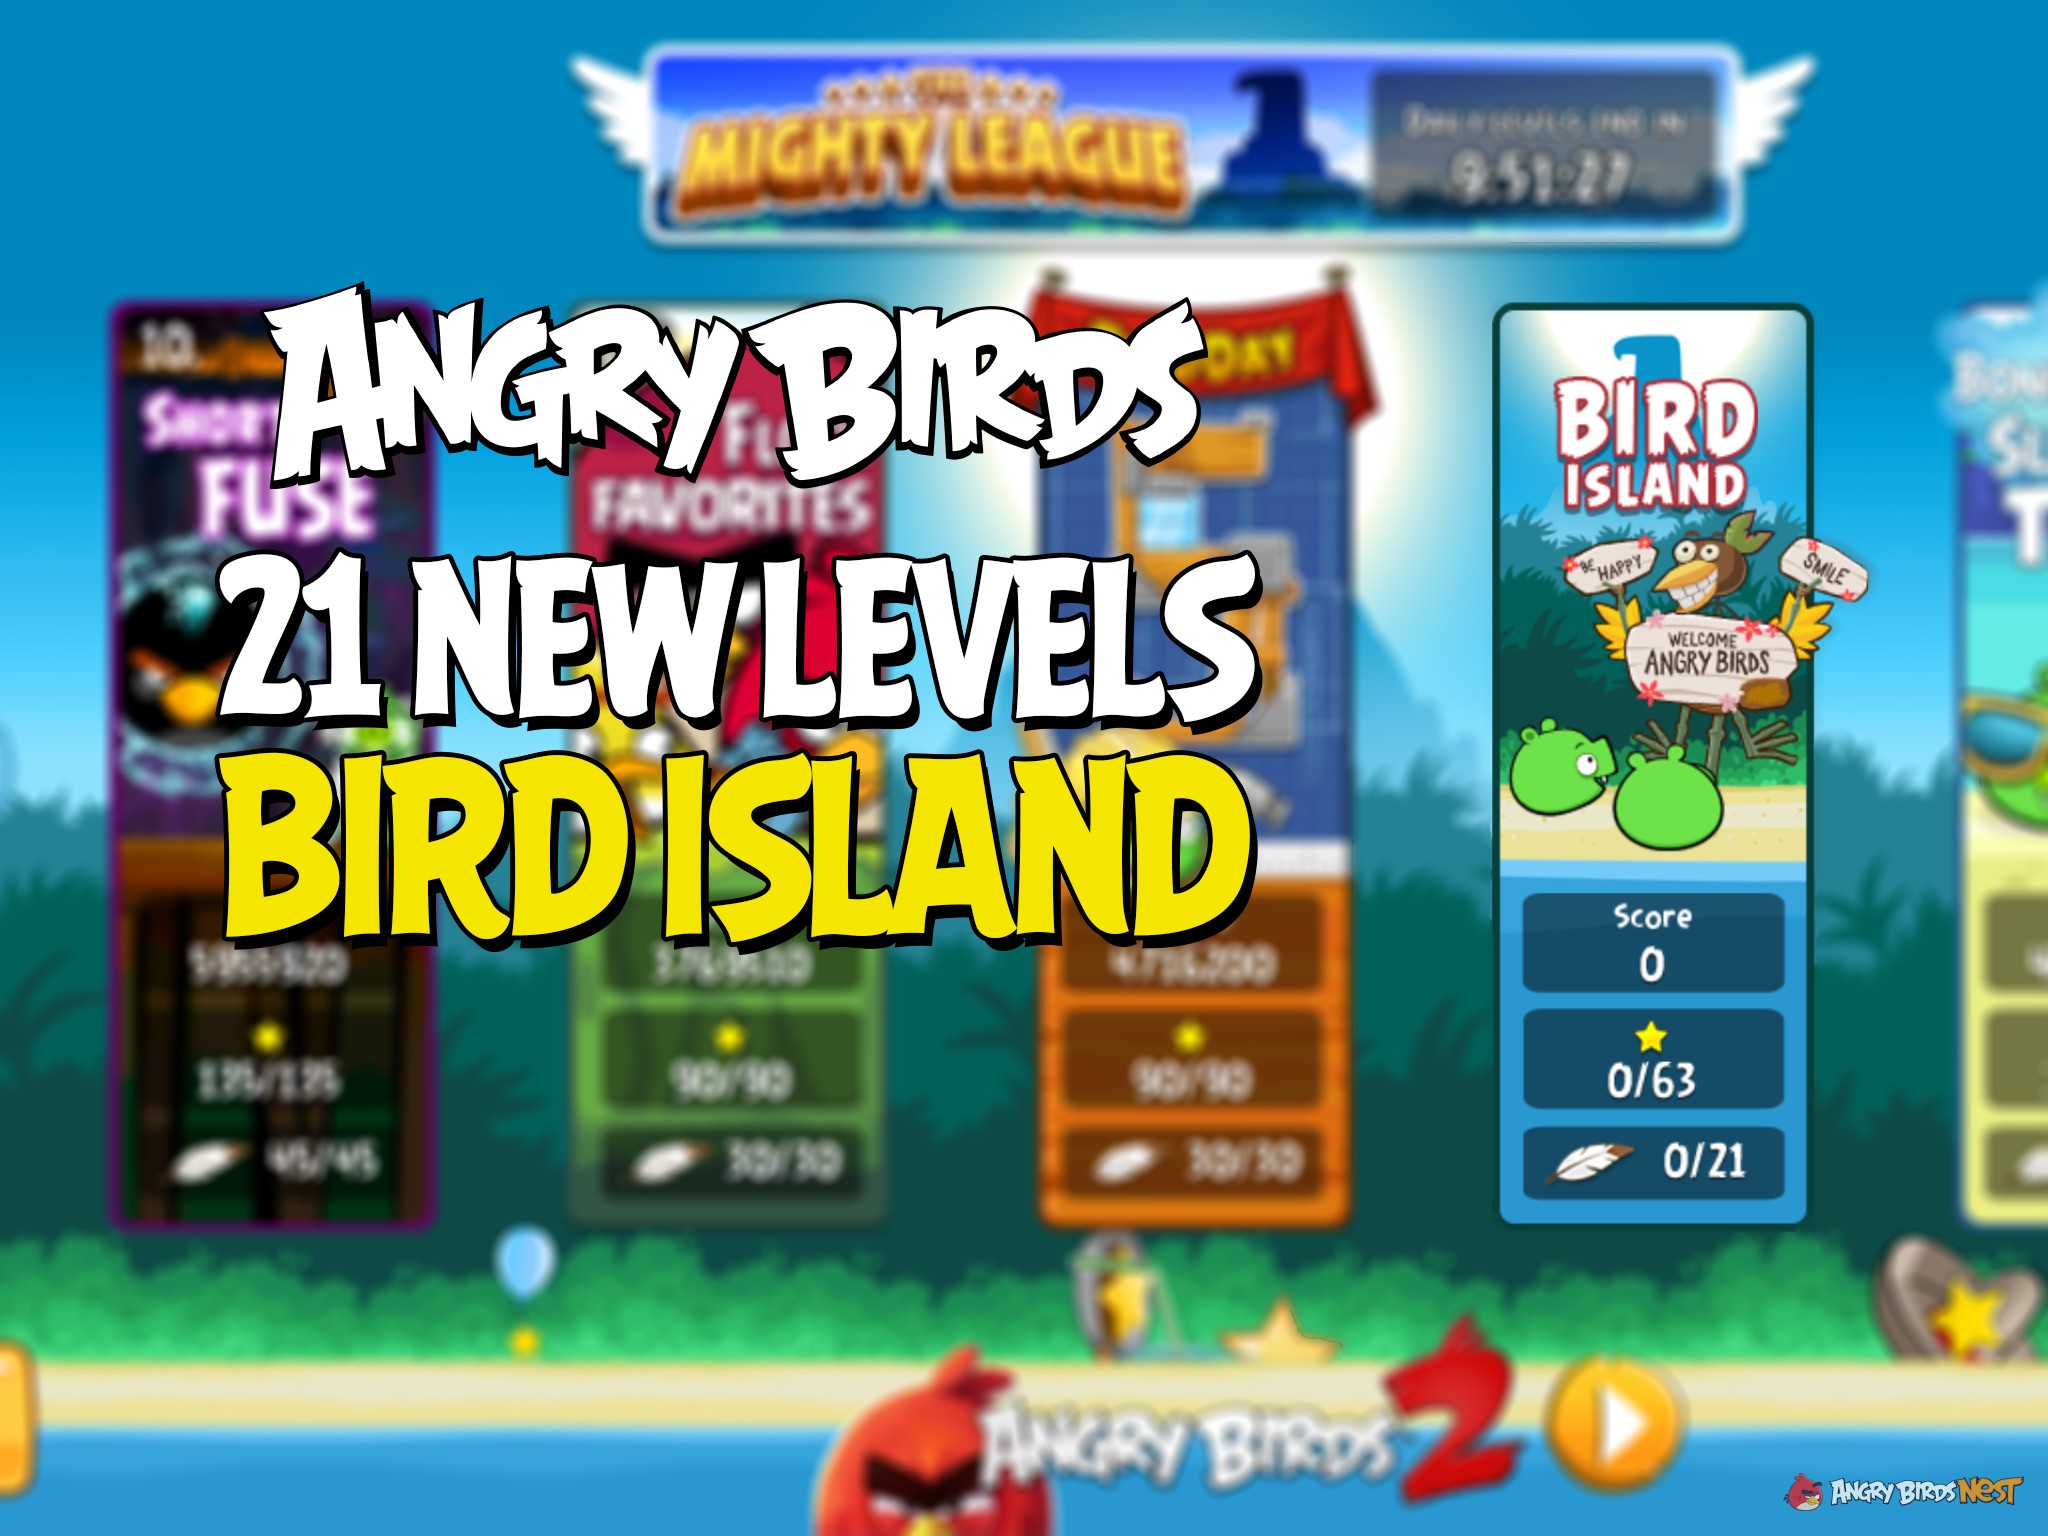 Angry Birds “Bird Island” Update! 21 New Levels Coming Soon